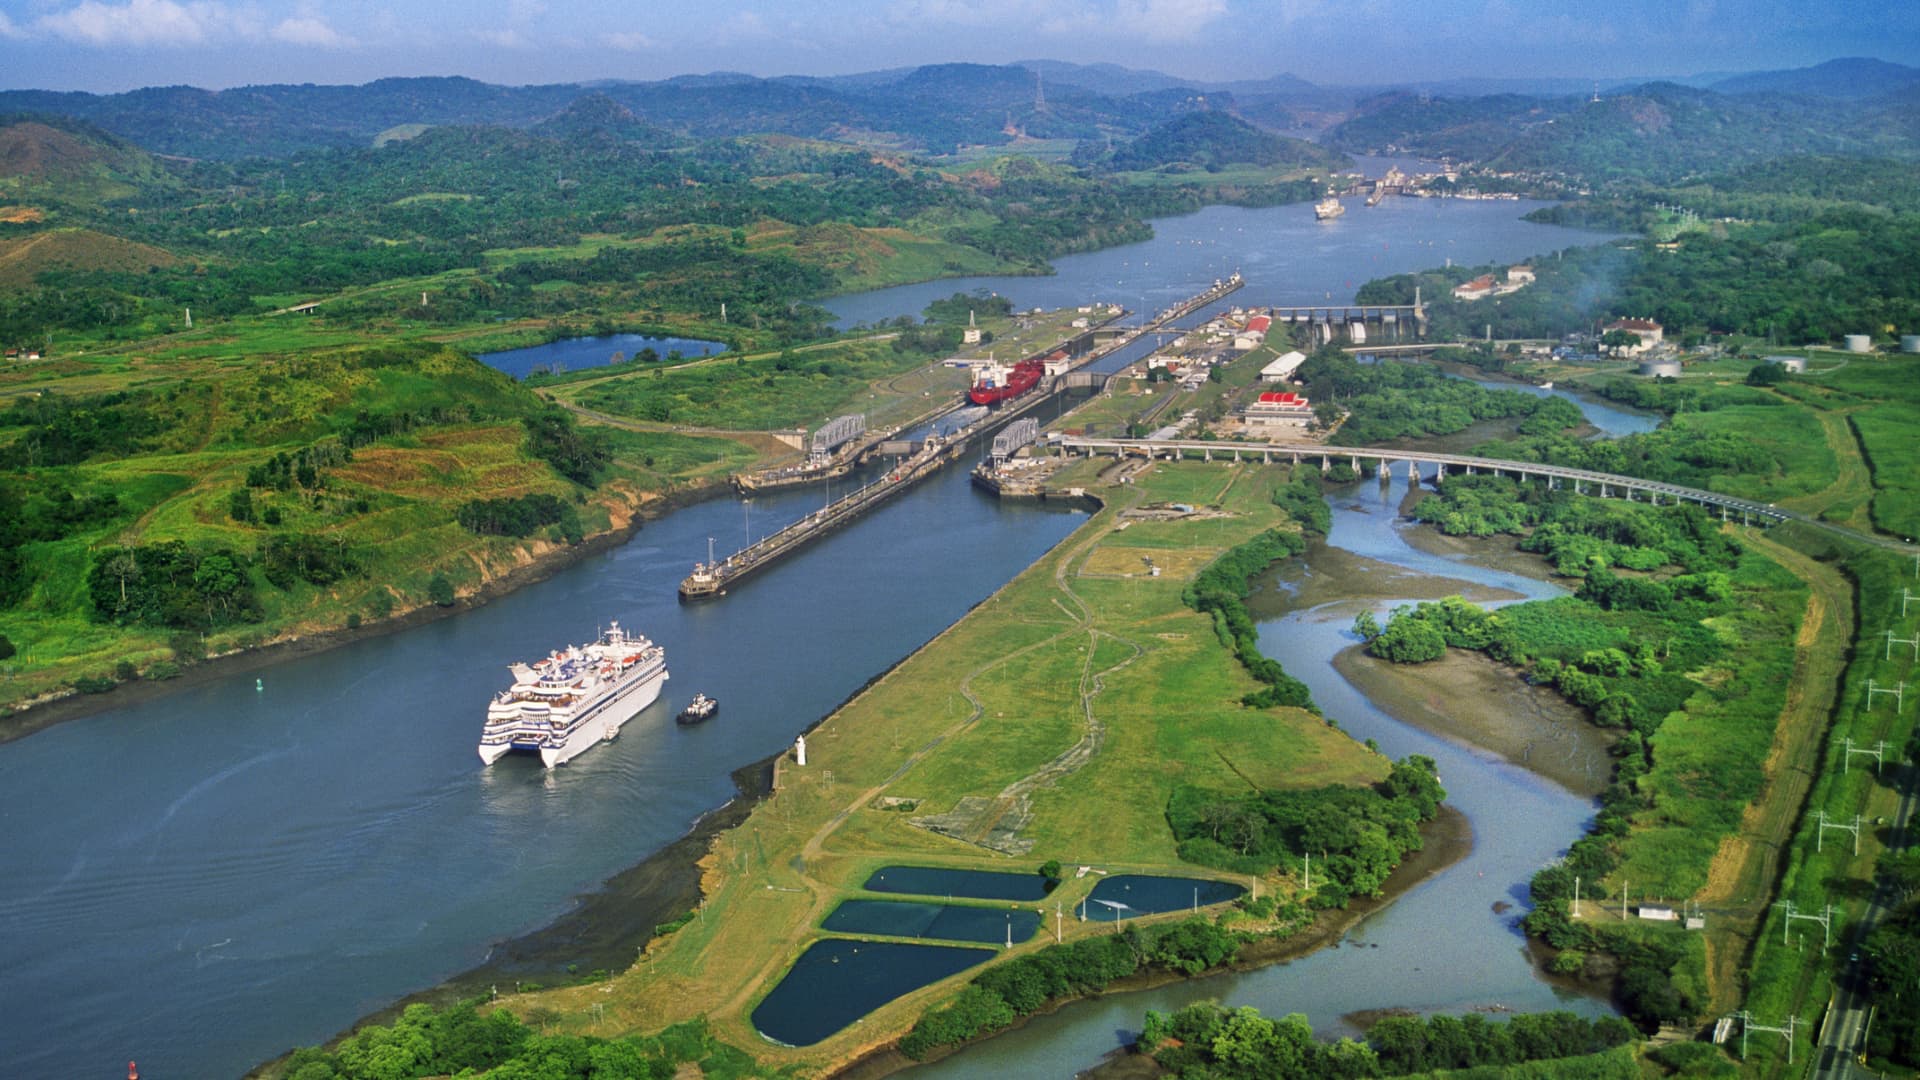 The Panama Canal in Panama, Central America.